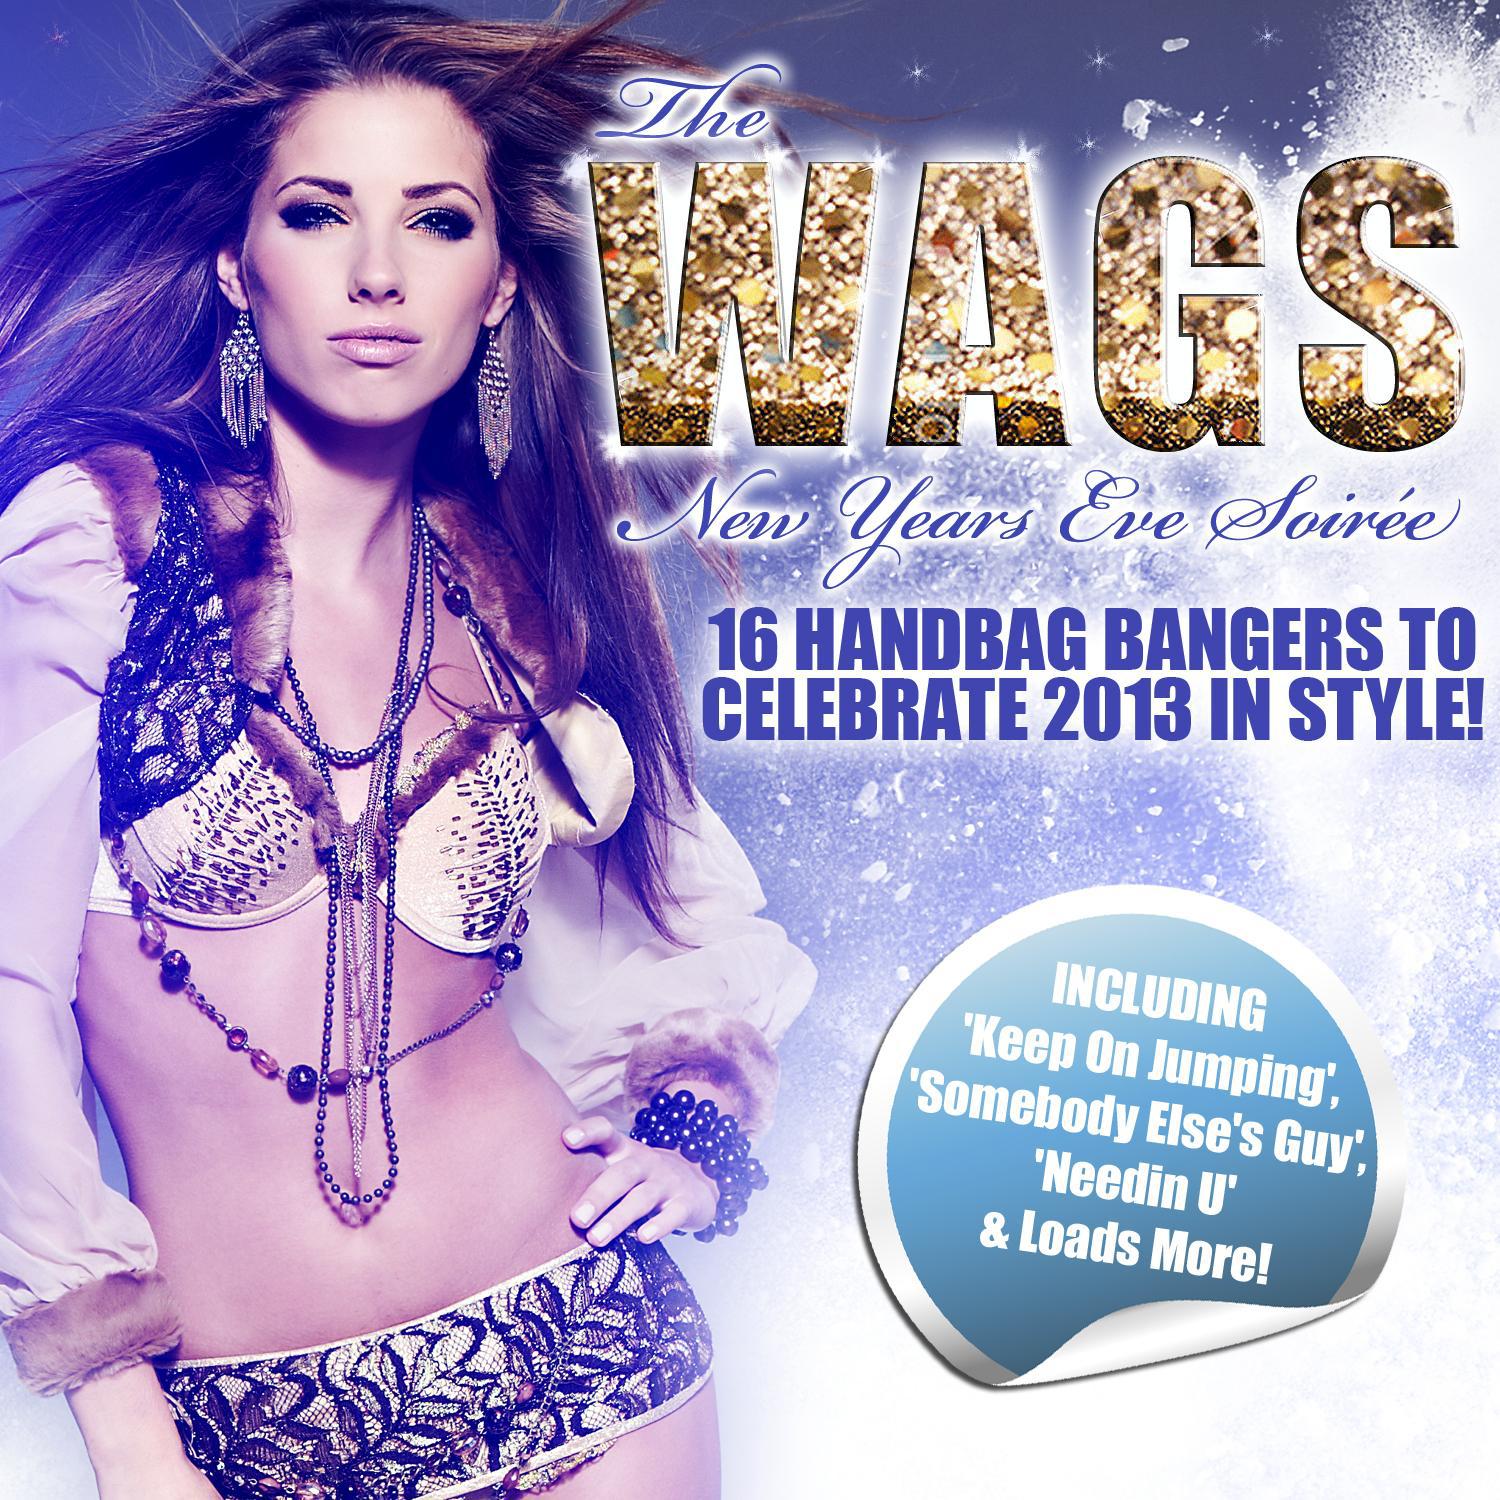 The Wags Album  New Years Eve Soire e